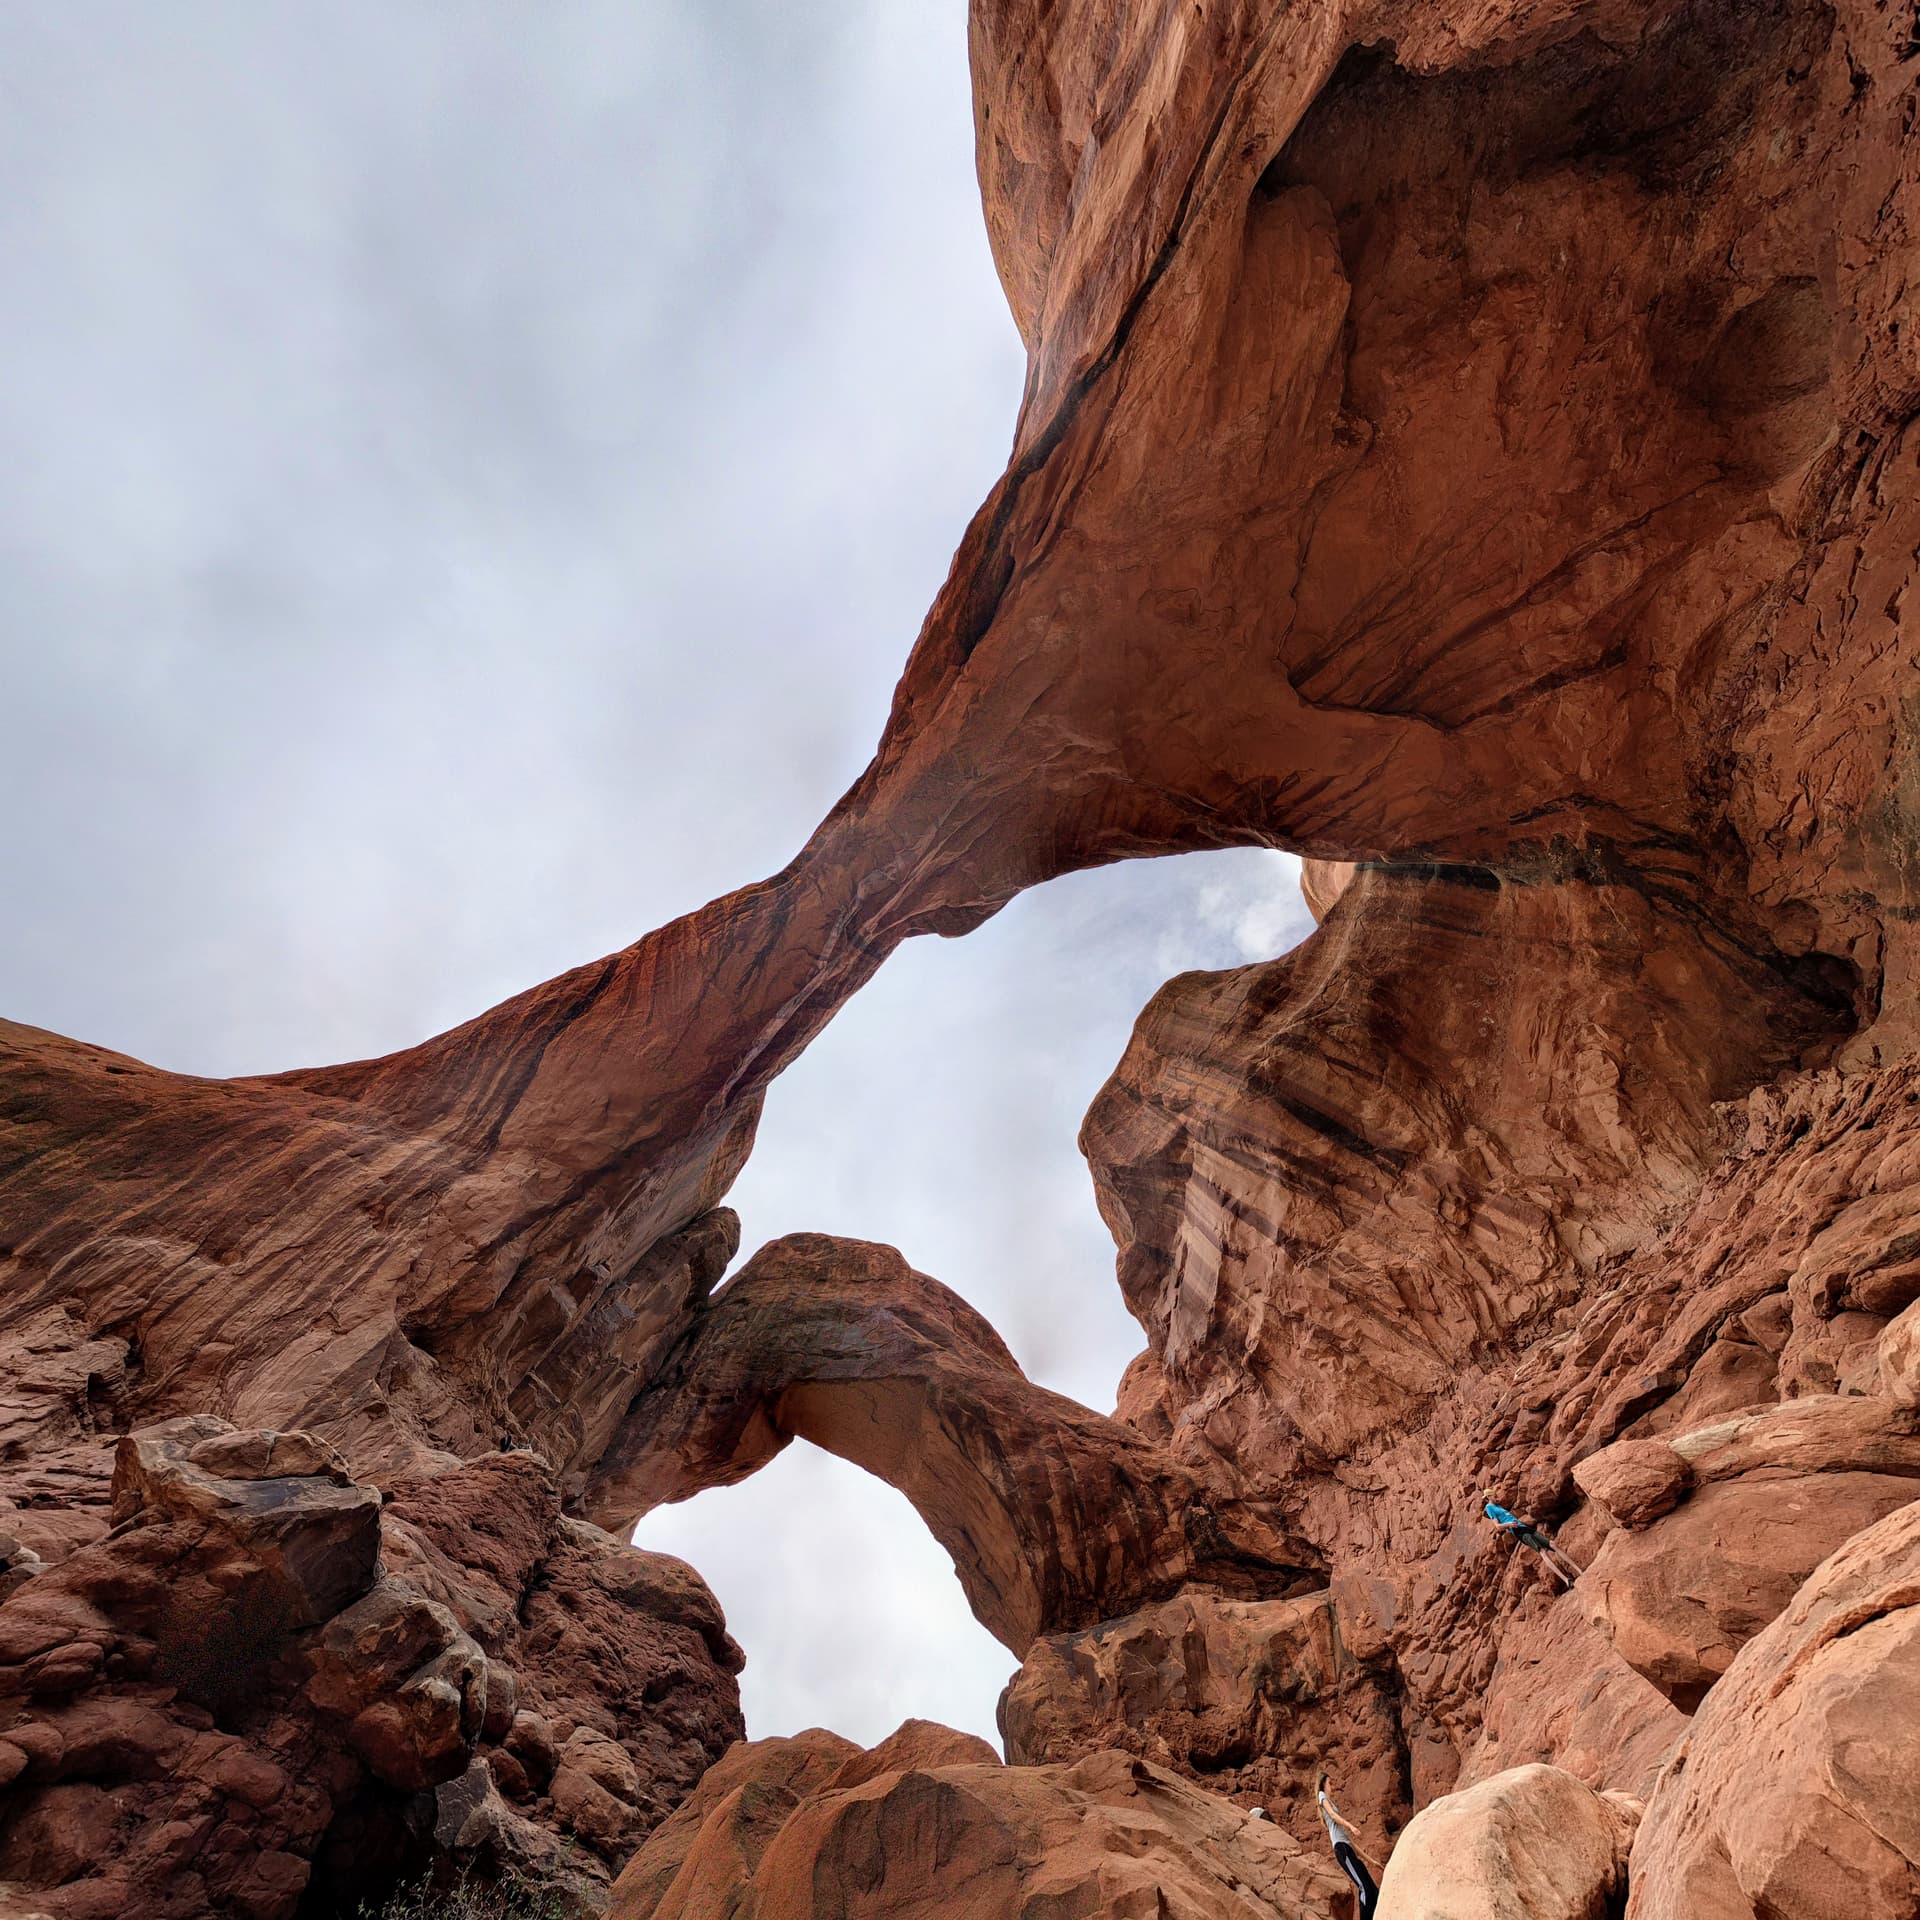 A wide-angle photograph looking up at Double Arch in Arches National Park. Both arches can be seen, almost at right angles to each other, with the closest arcing almost directly overhead.